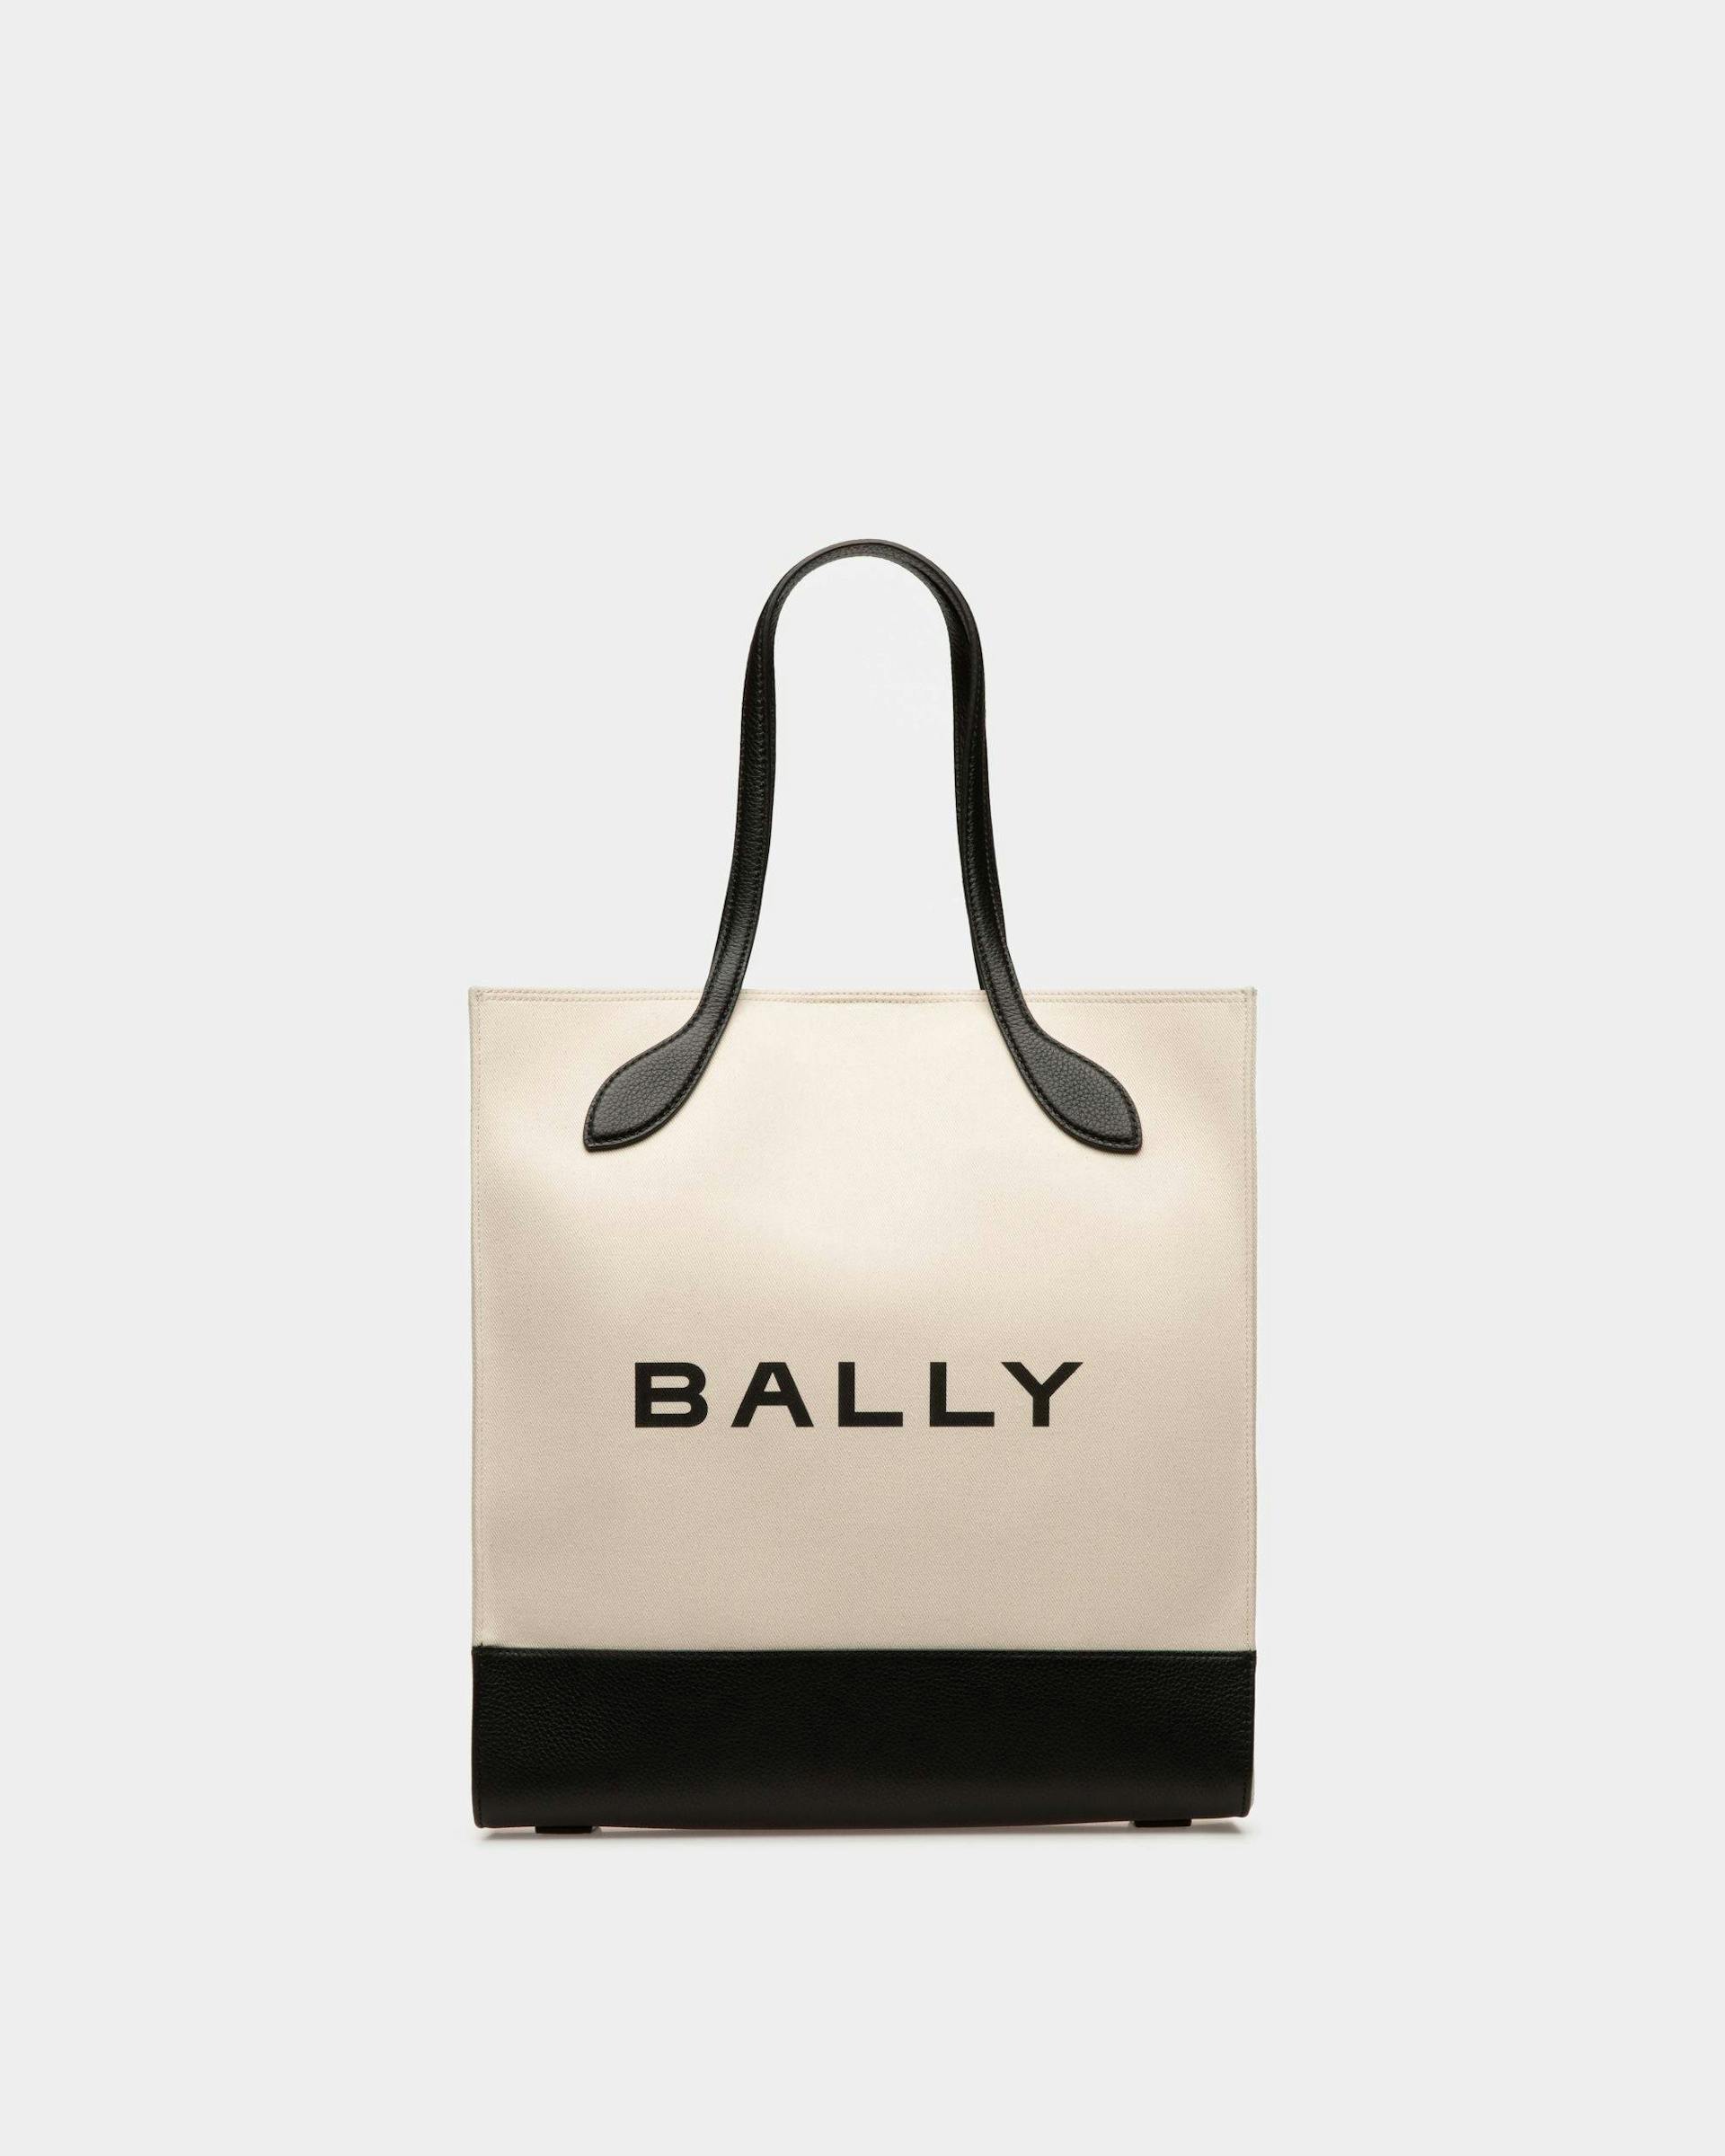 Keep On | Women's Tote Bag | Natural And Black Fabric | Bally